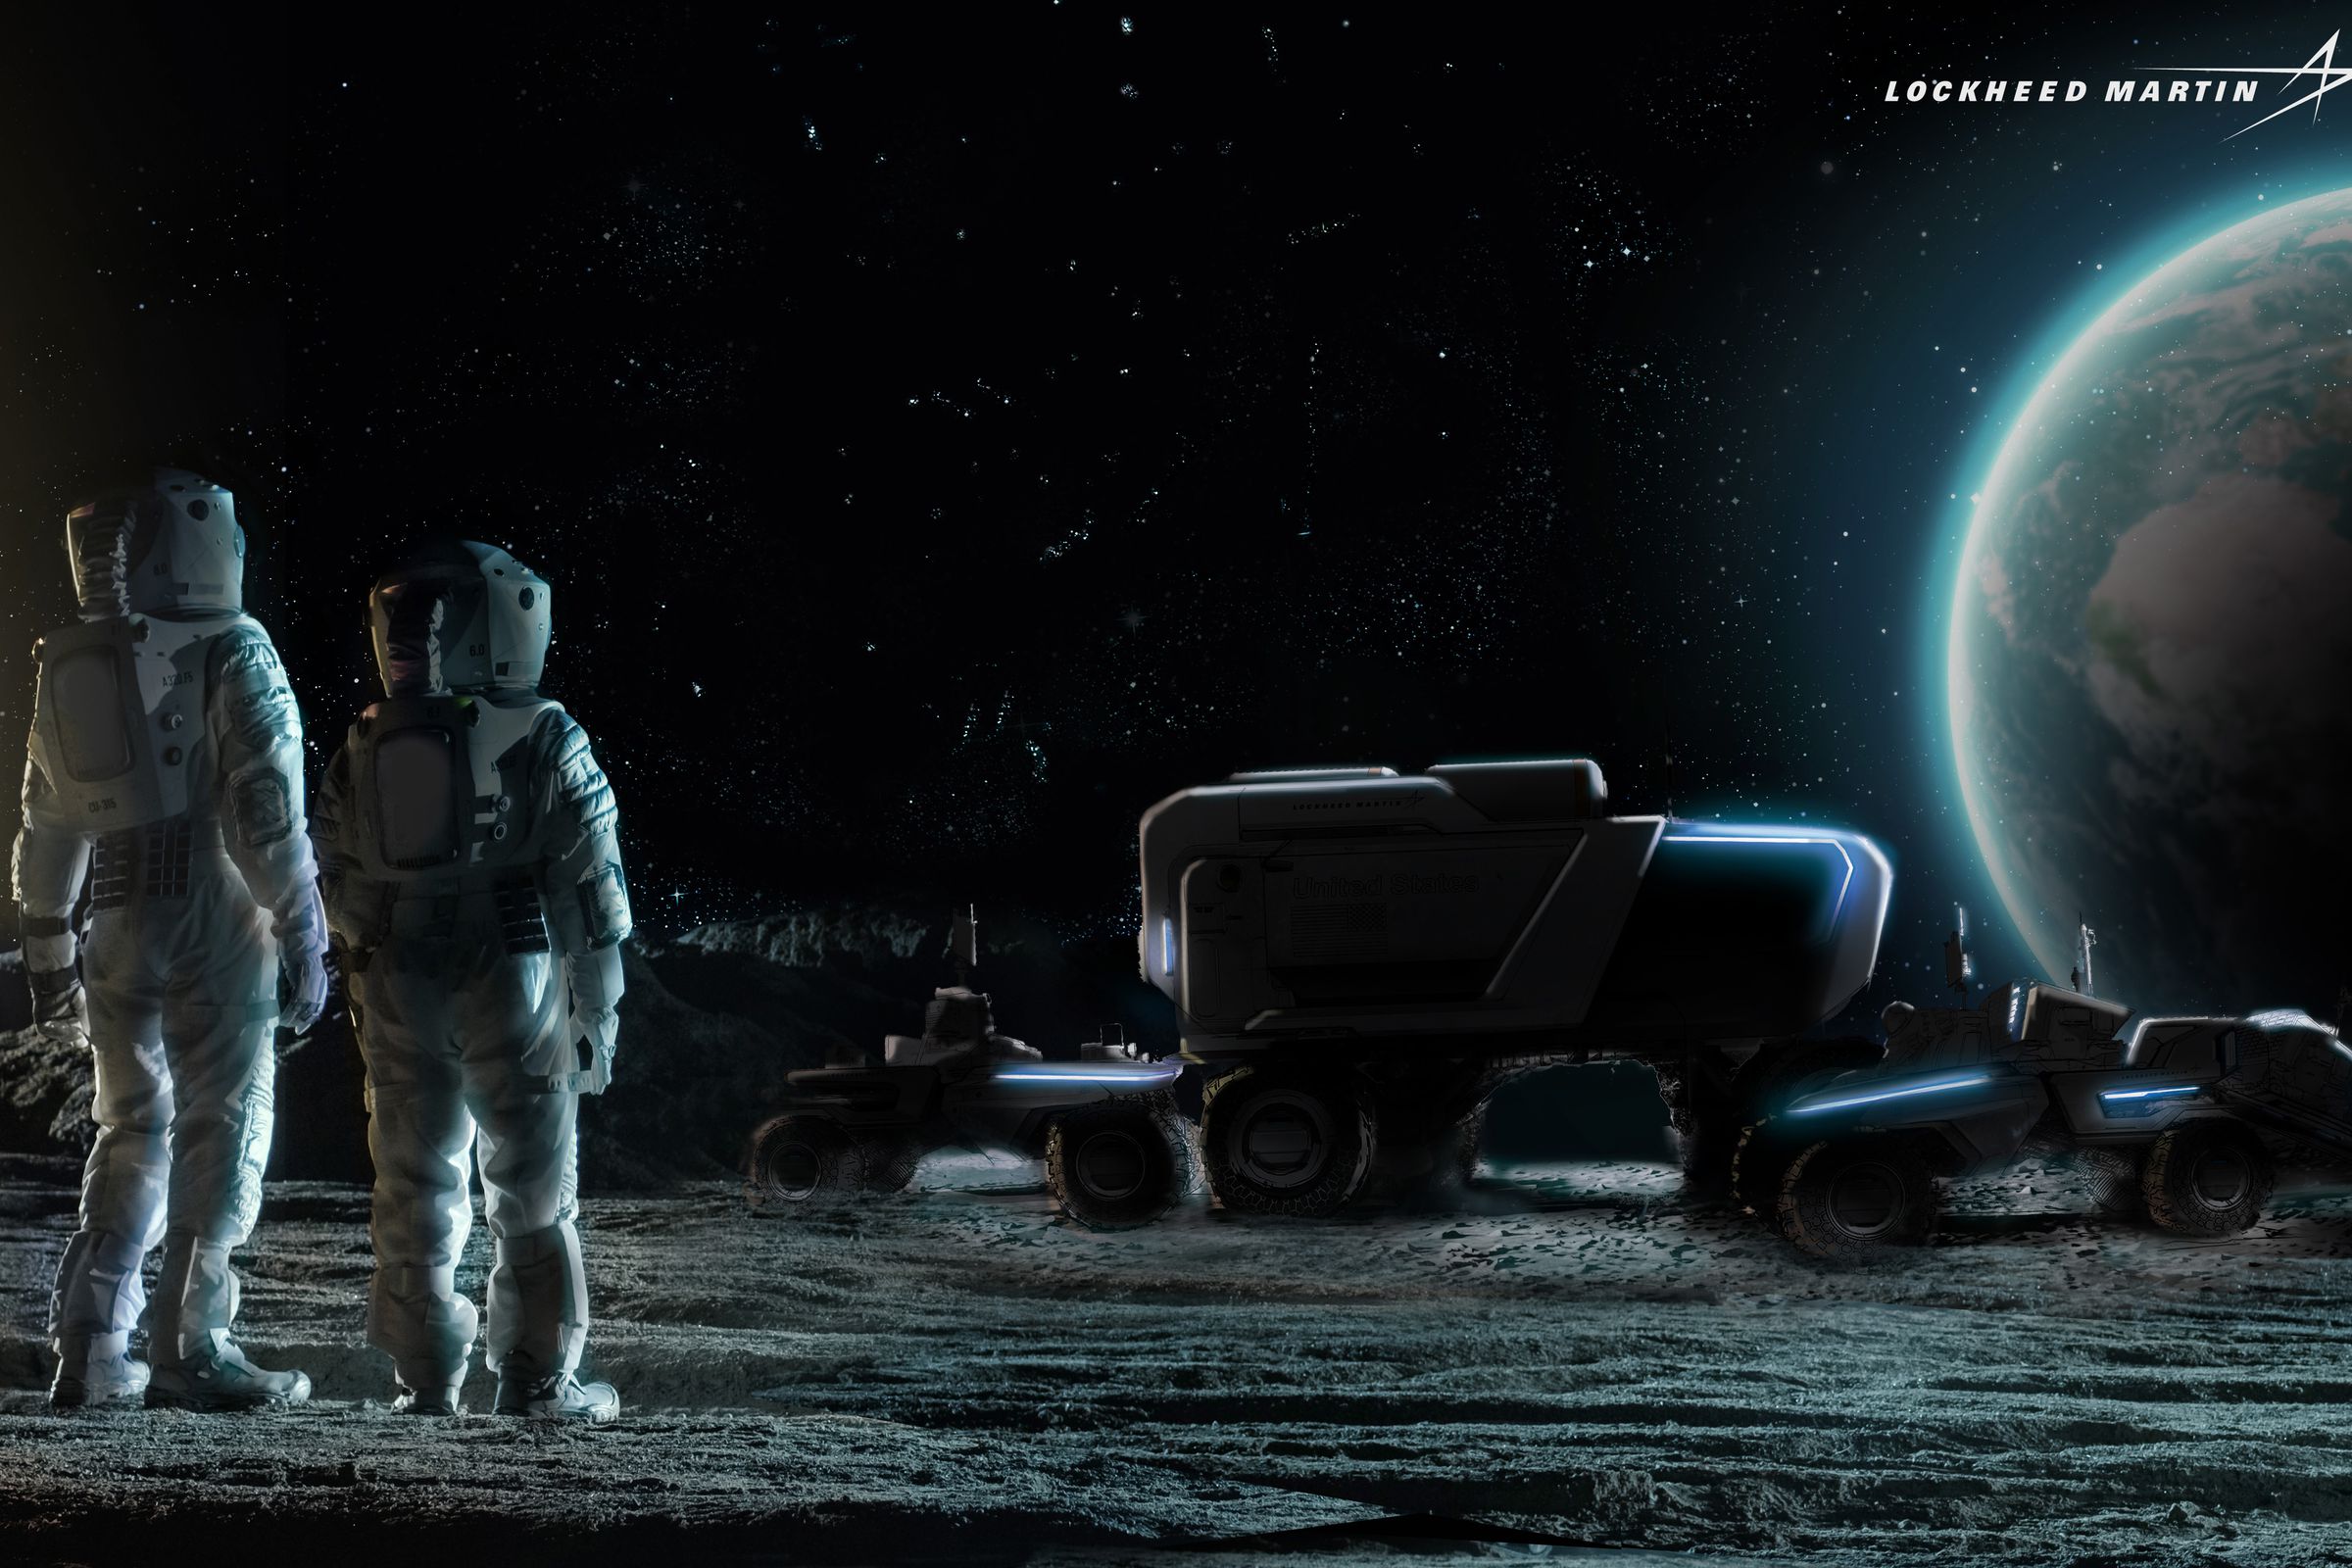 A company illustration shows astronauts staring at a fleet of conceptual lunar rovers.